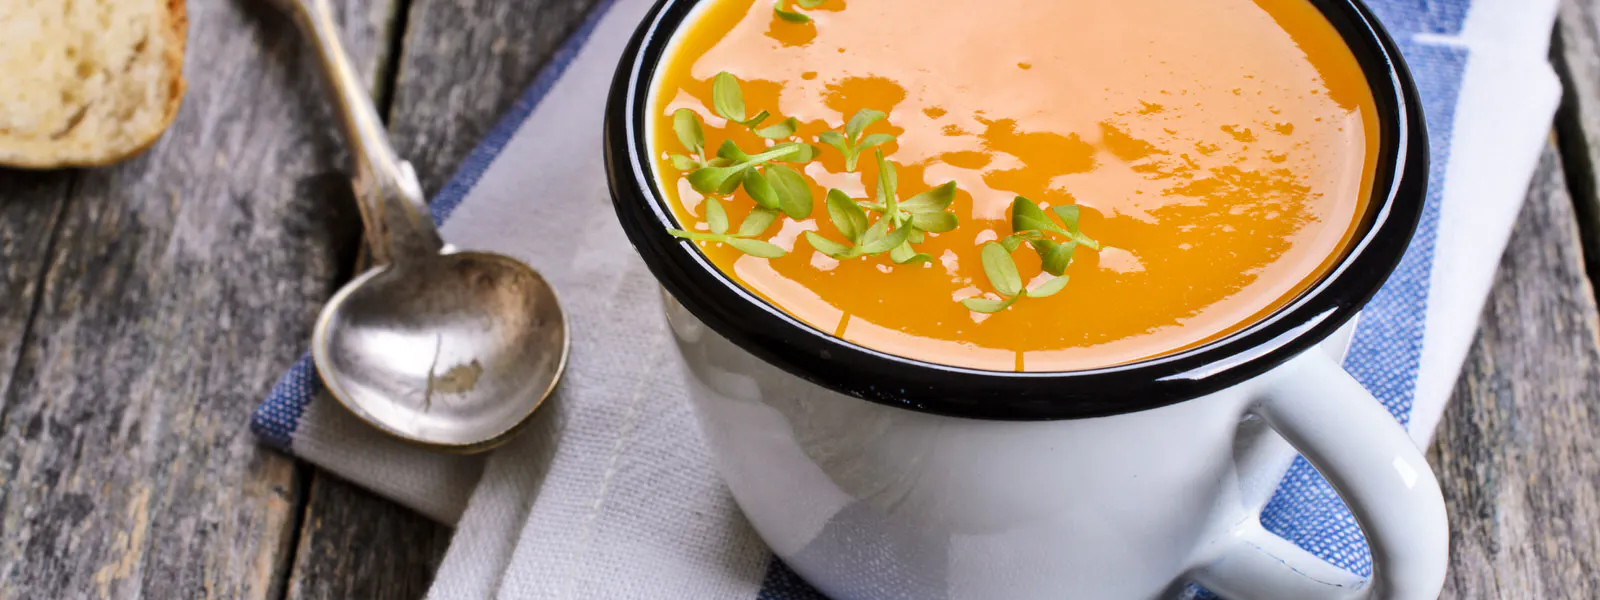 roasted pumpkin soup traeger grill